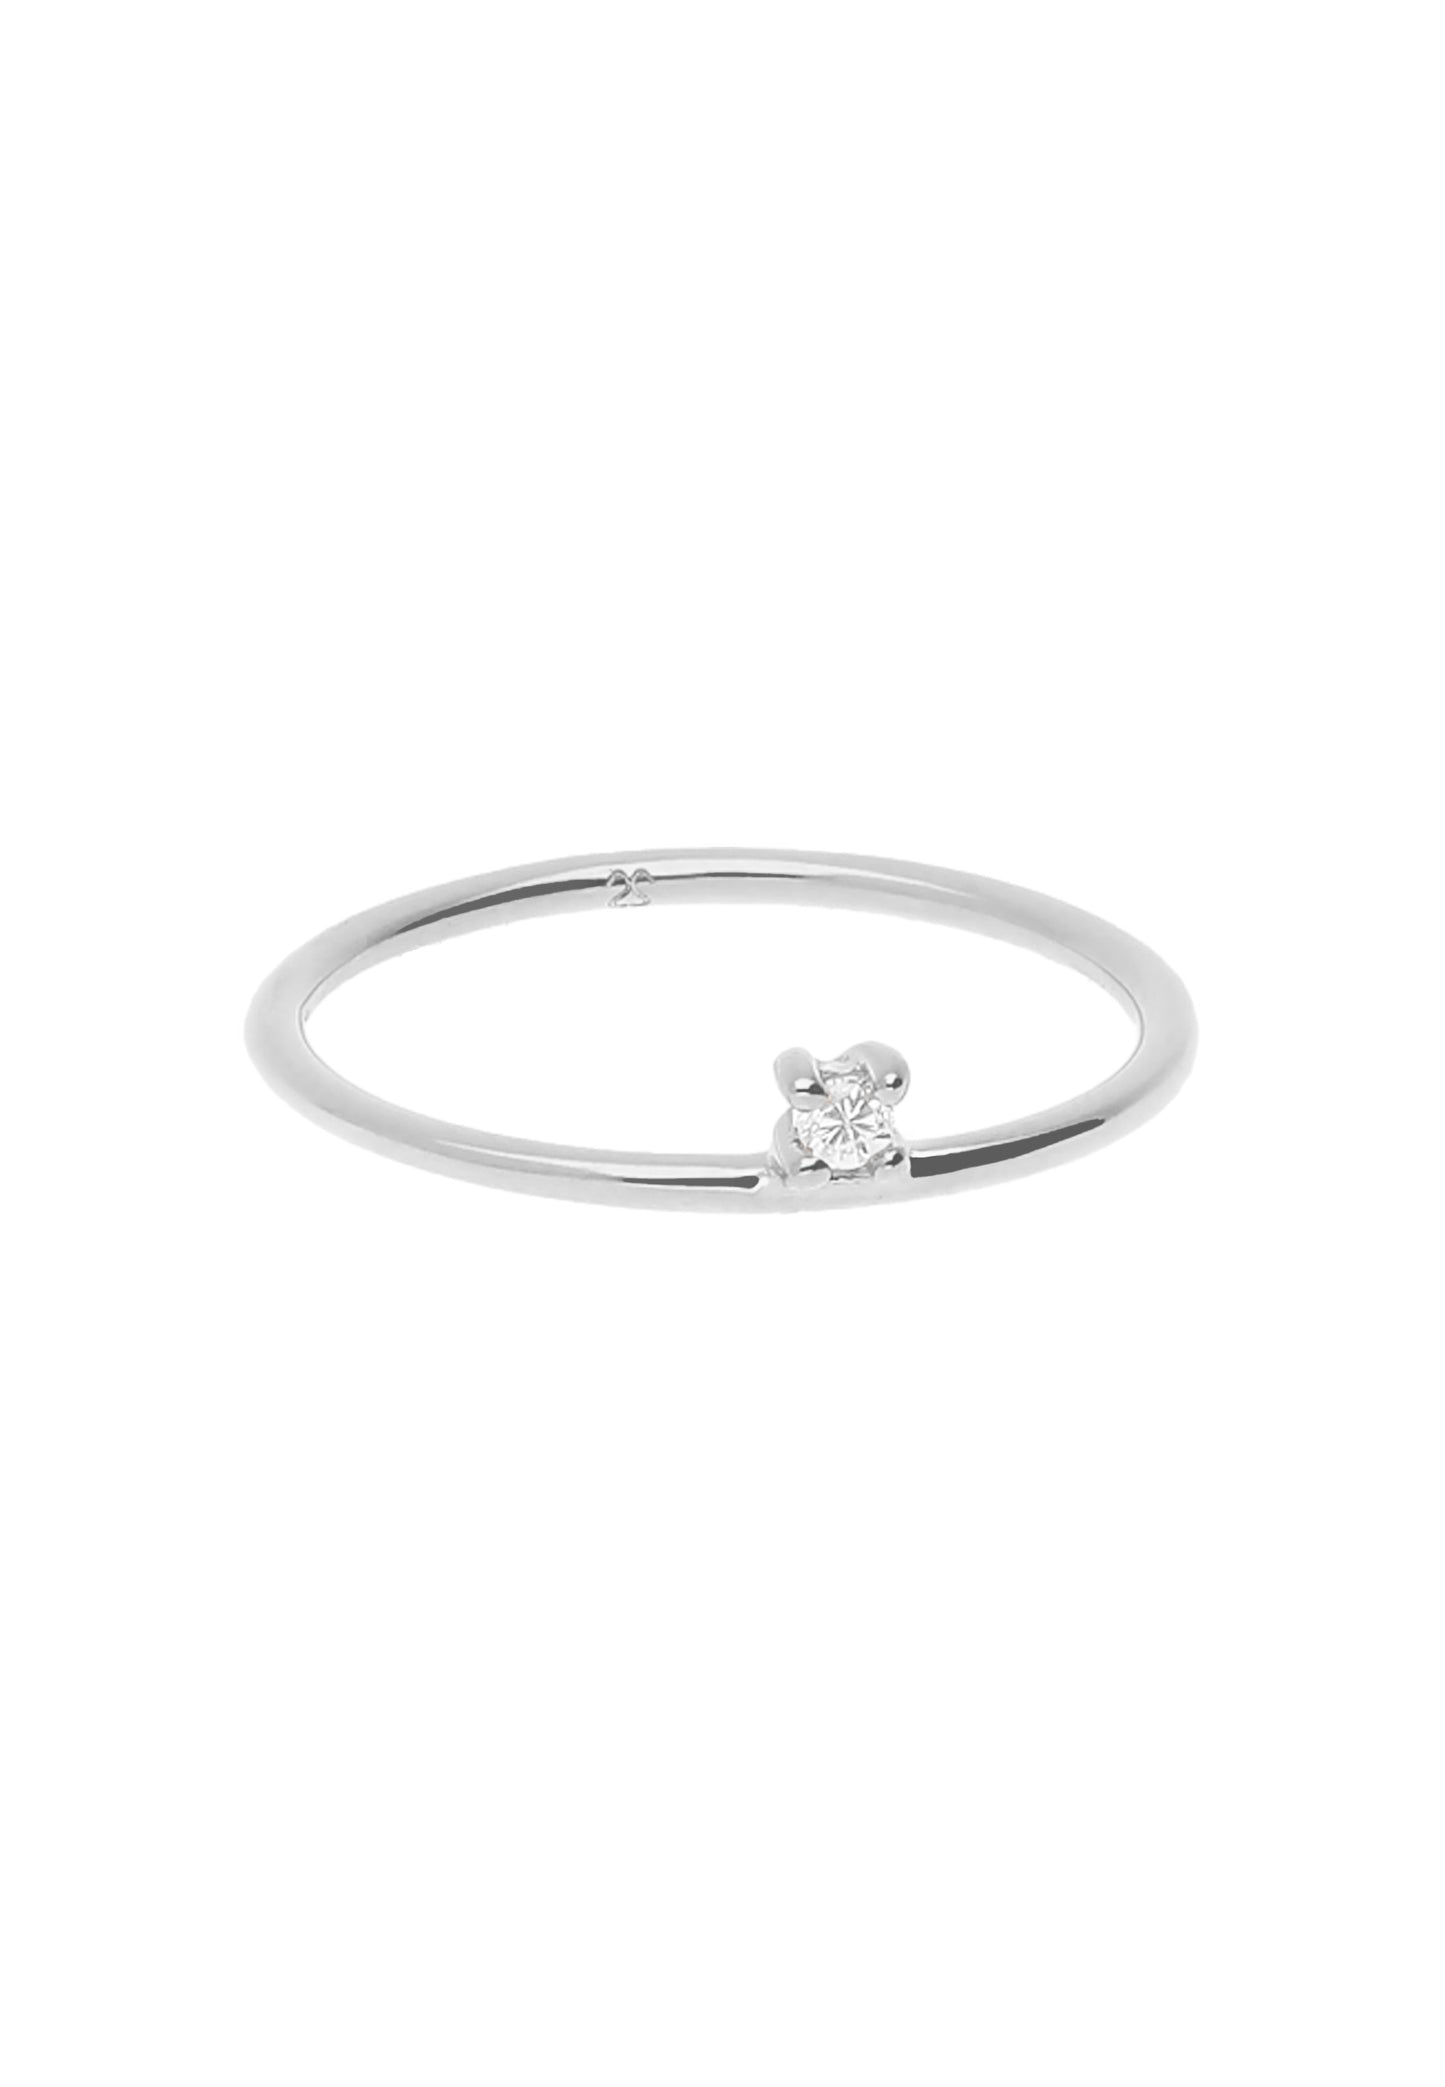 CASSIOPEIA WHITE GOLD RING